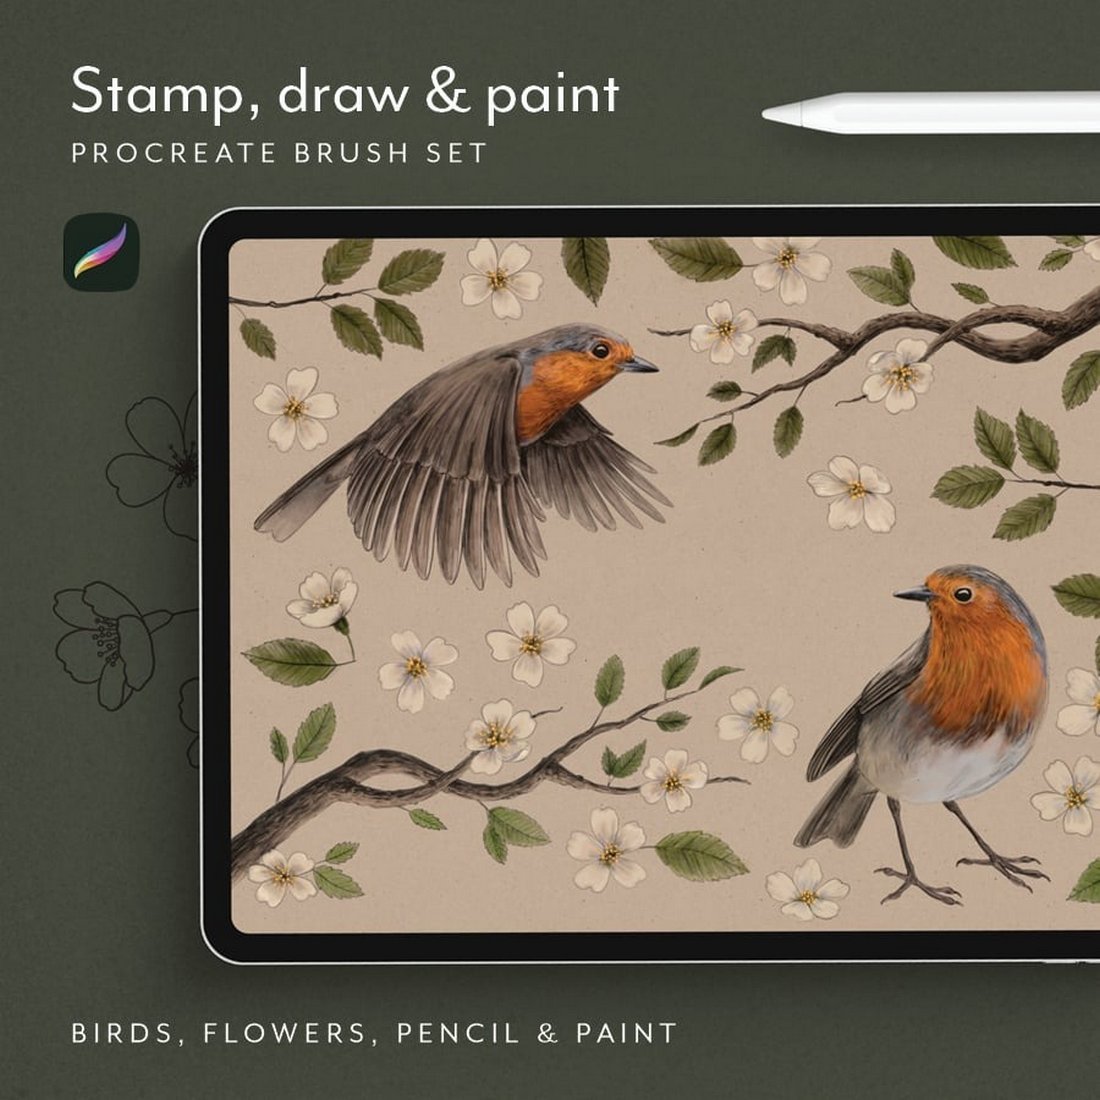 Free Stamp, Draw & Paint Procreate Brushes